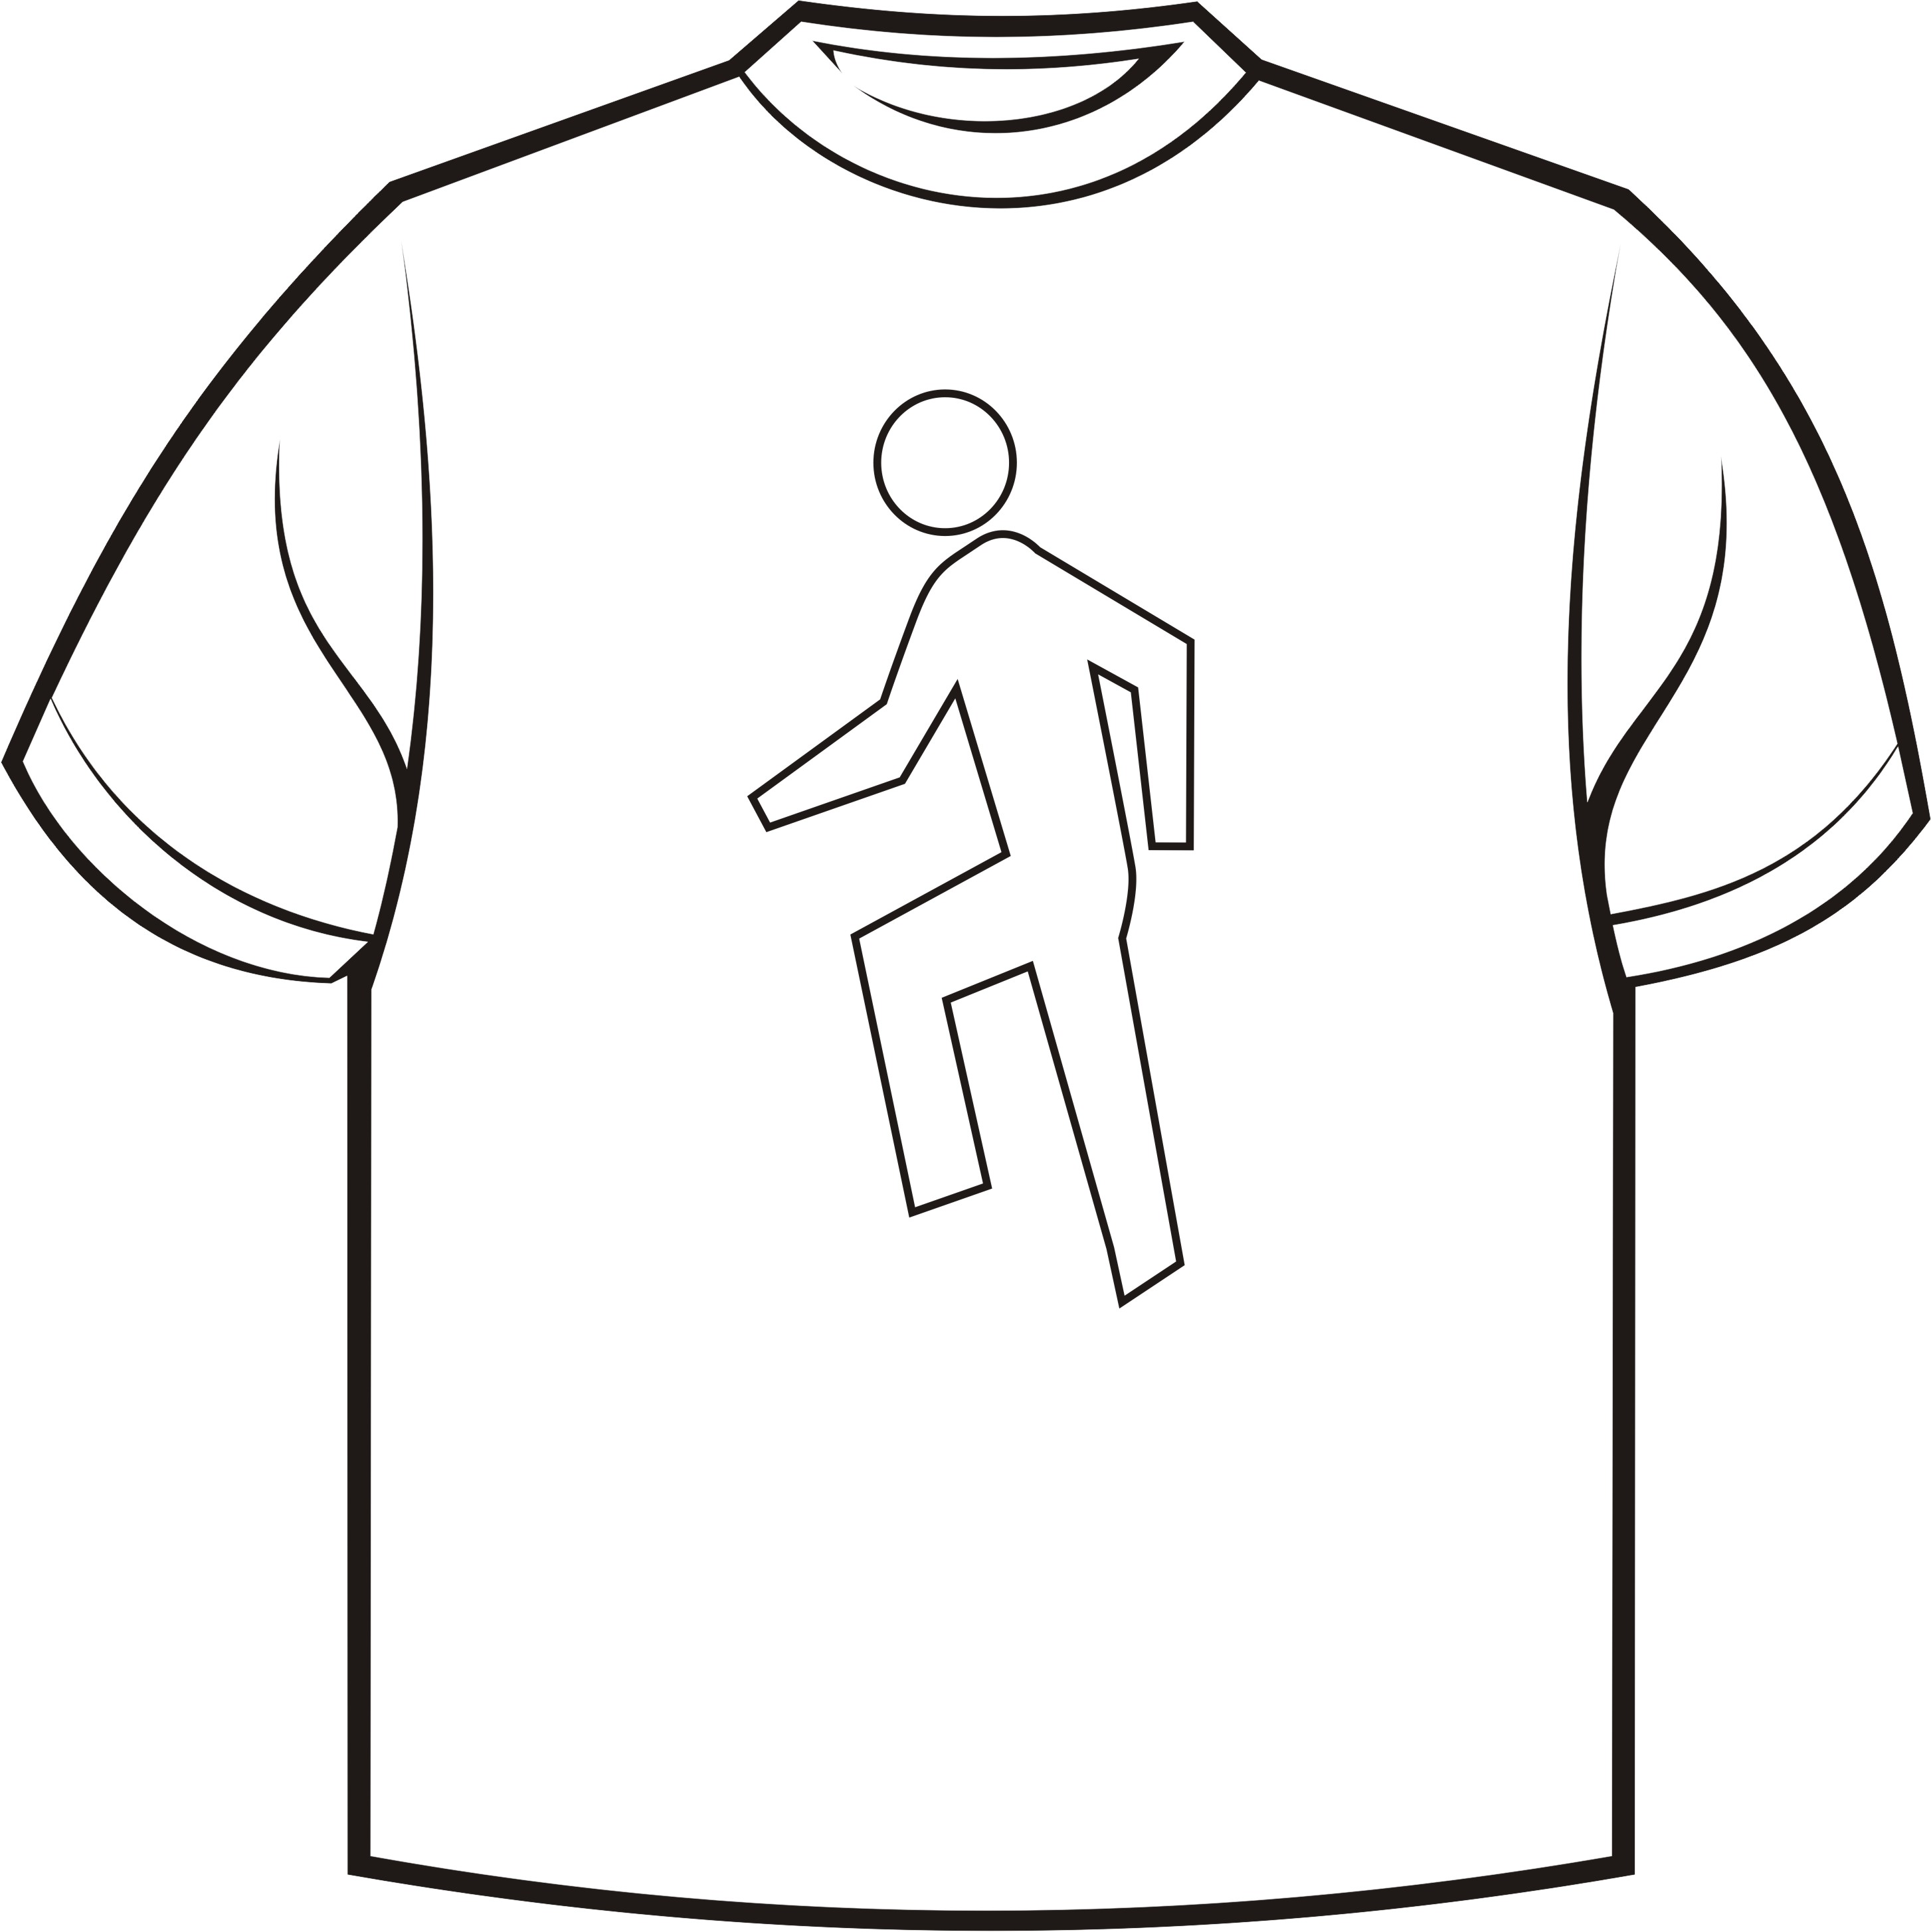 Download T Shirt Printable Blank Shirt Outline Clipart PNG Free Intended For Blank T Shirt Outline Template